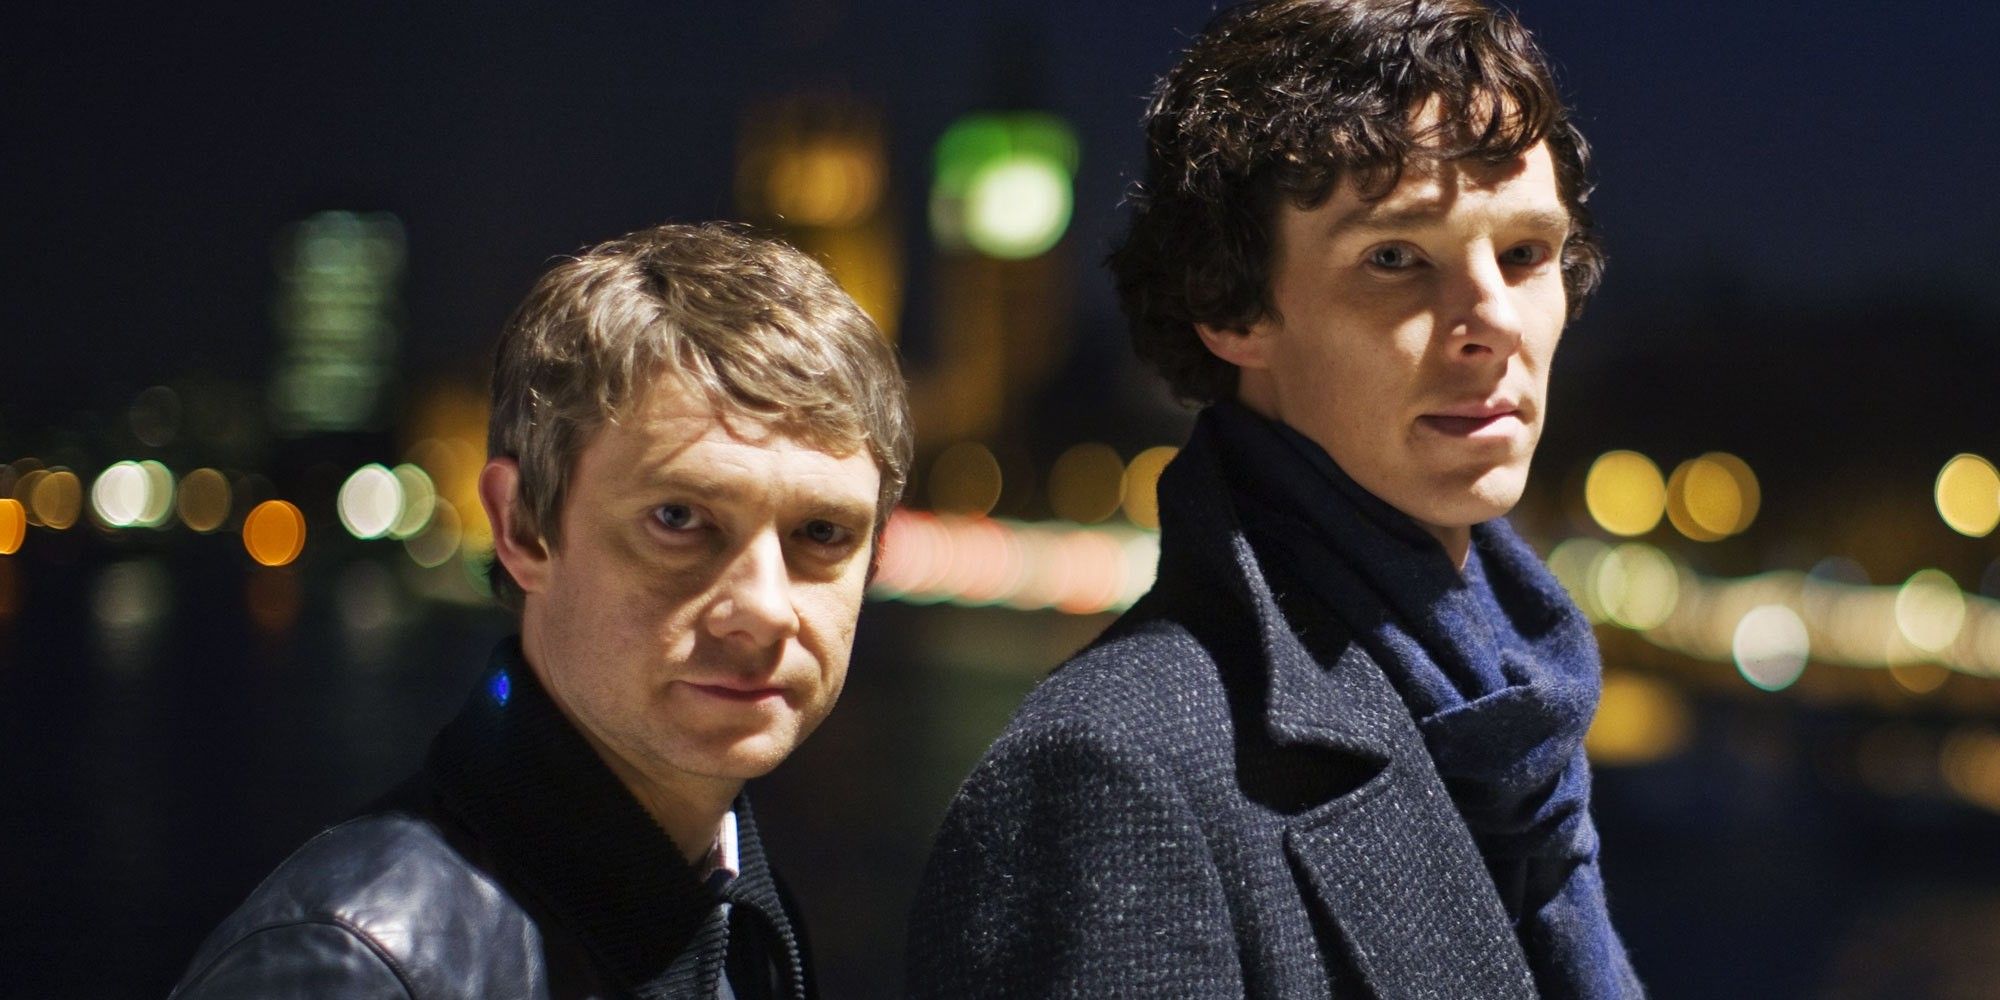 Martin Freeman and Benedict Cumberbatch as John Watson and Sherlock Holmes staring at the camera for a promotional image for BBC Sherlock